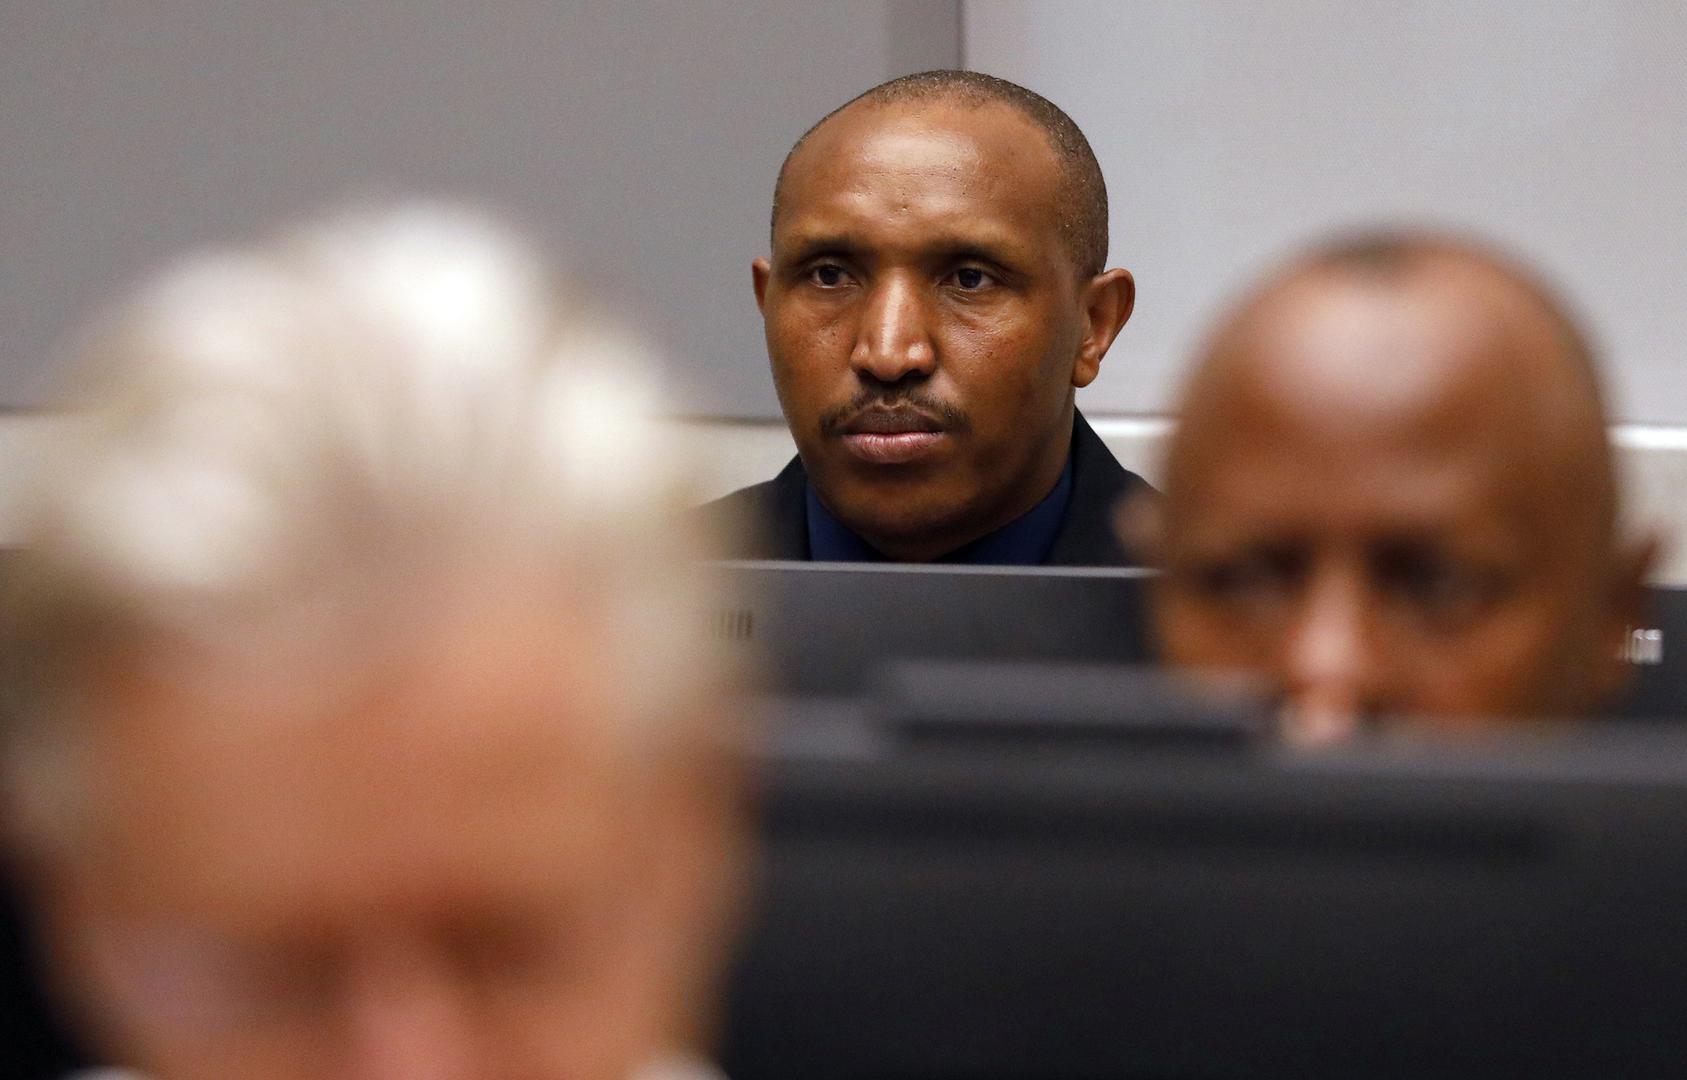 ICC: Congo Warlord Guilty of Crimes Against Humanity